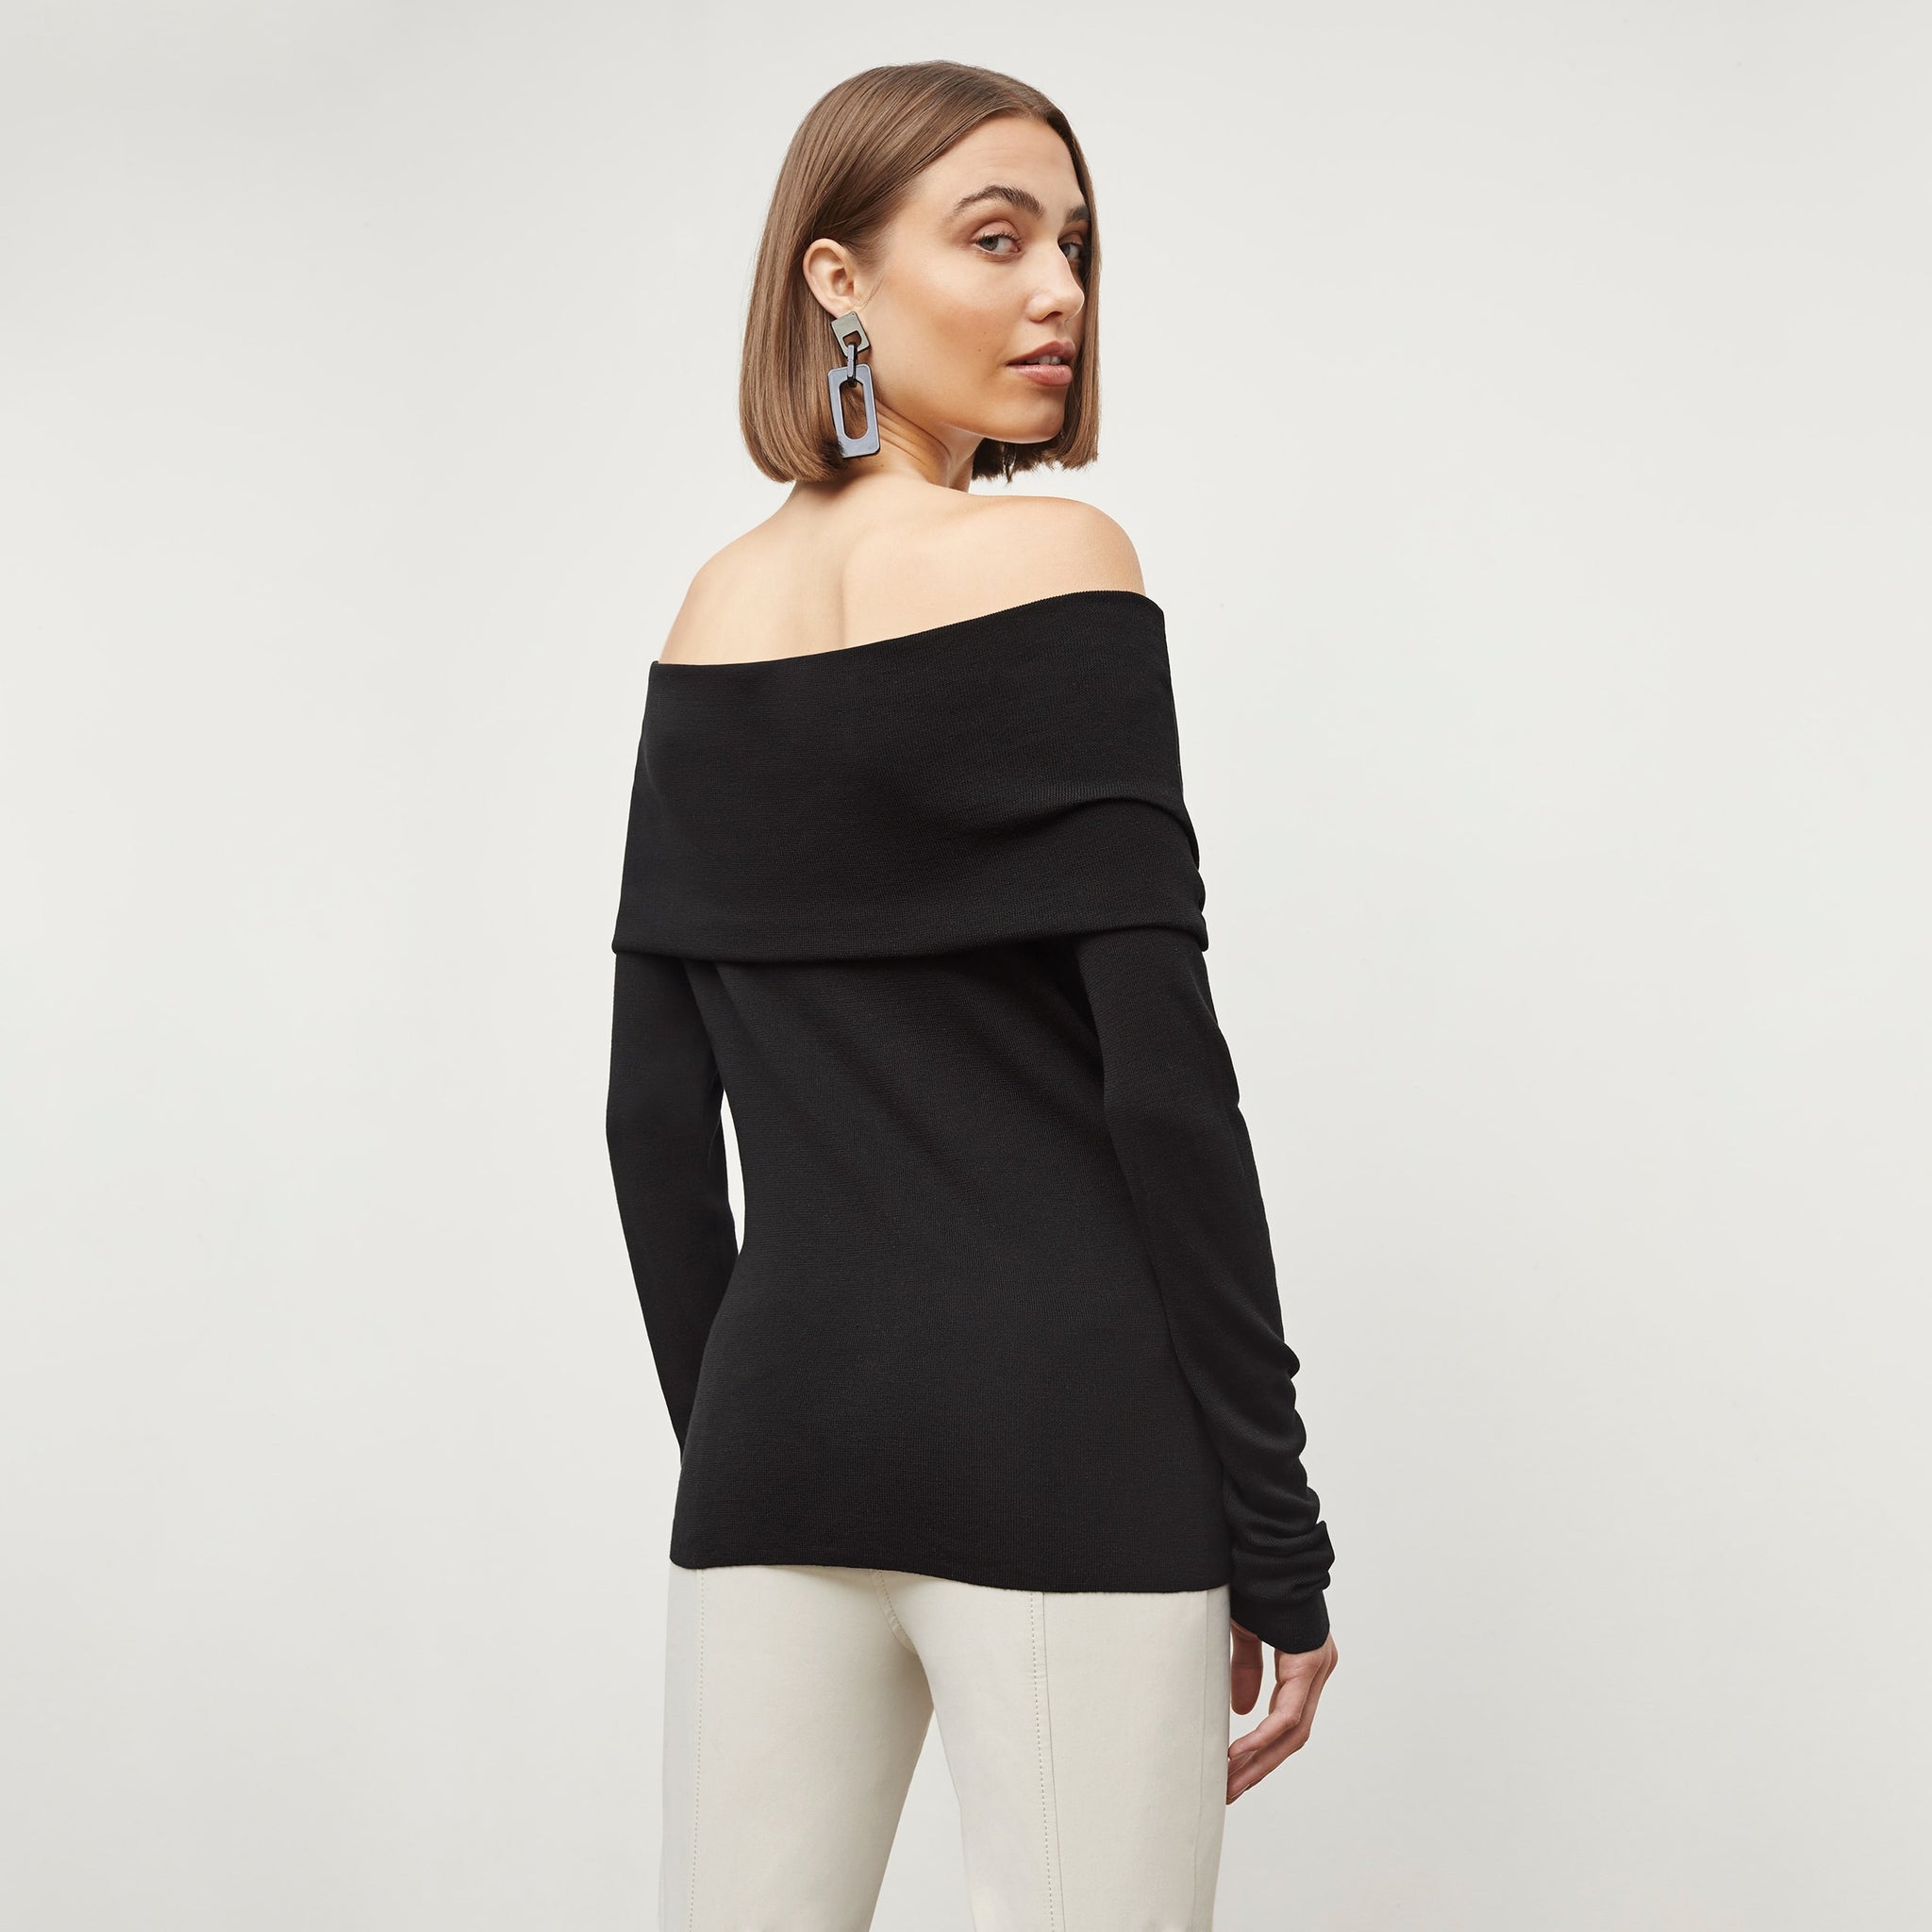 Back image of a woman standing wearing the dae top in silk jersey in black